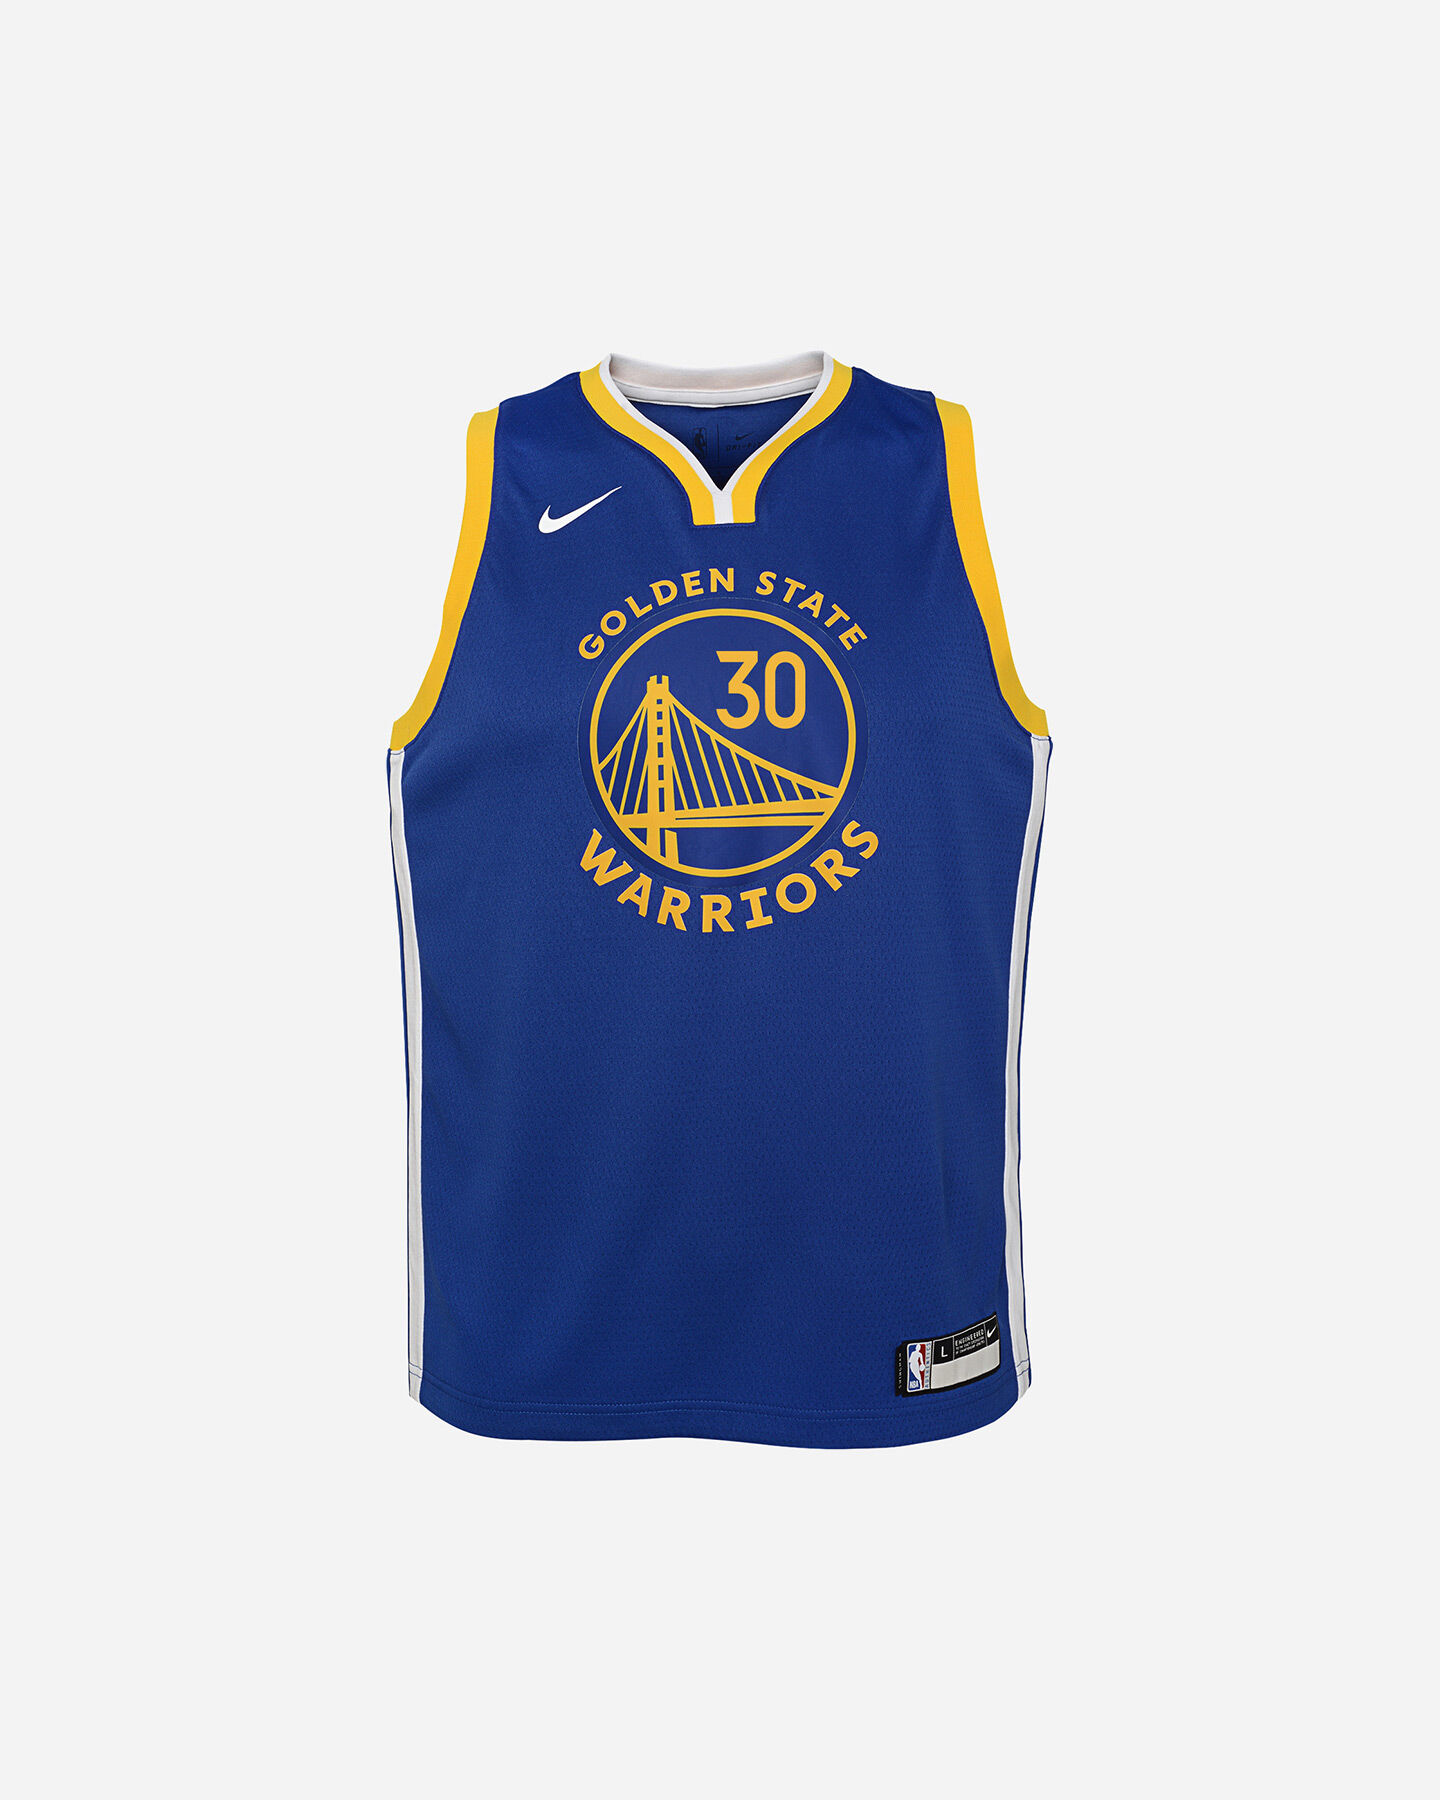  Canotta basket NIKE GOLDEN STATE WARRIORS CURRY JR S4061952|1|S scatto 0